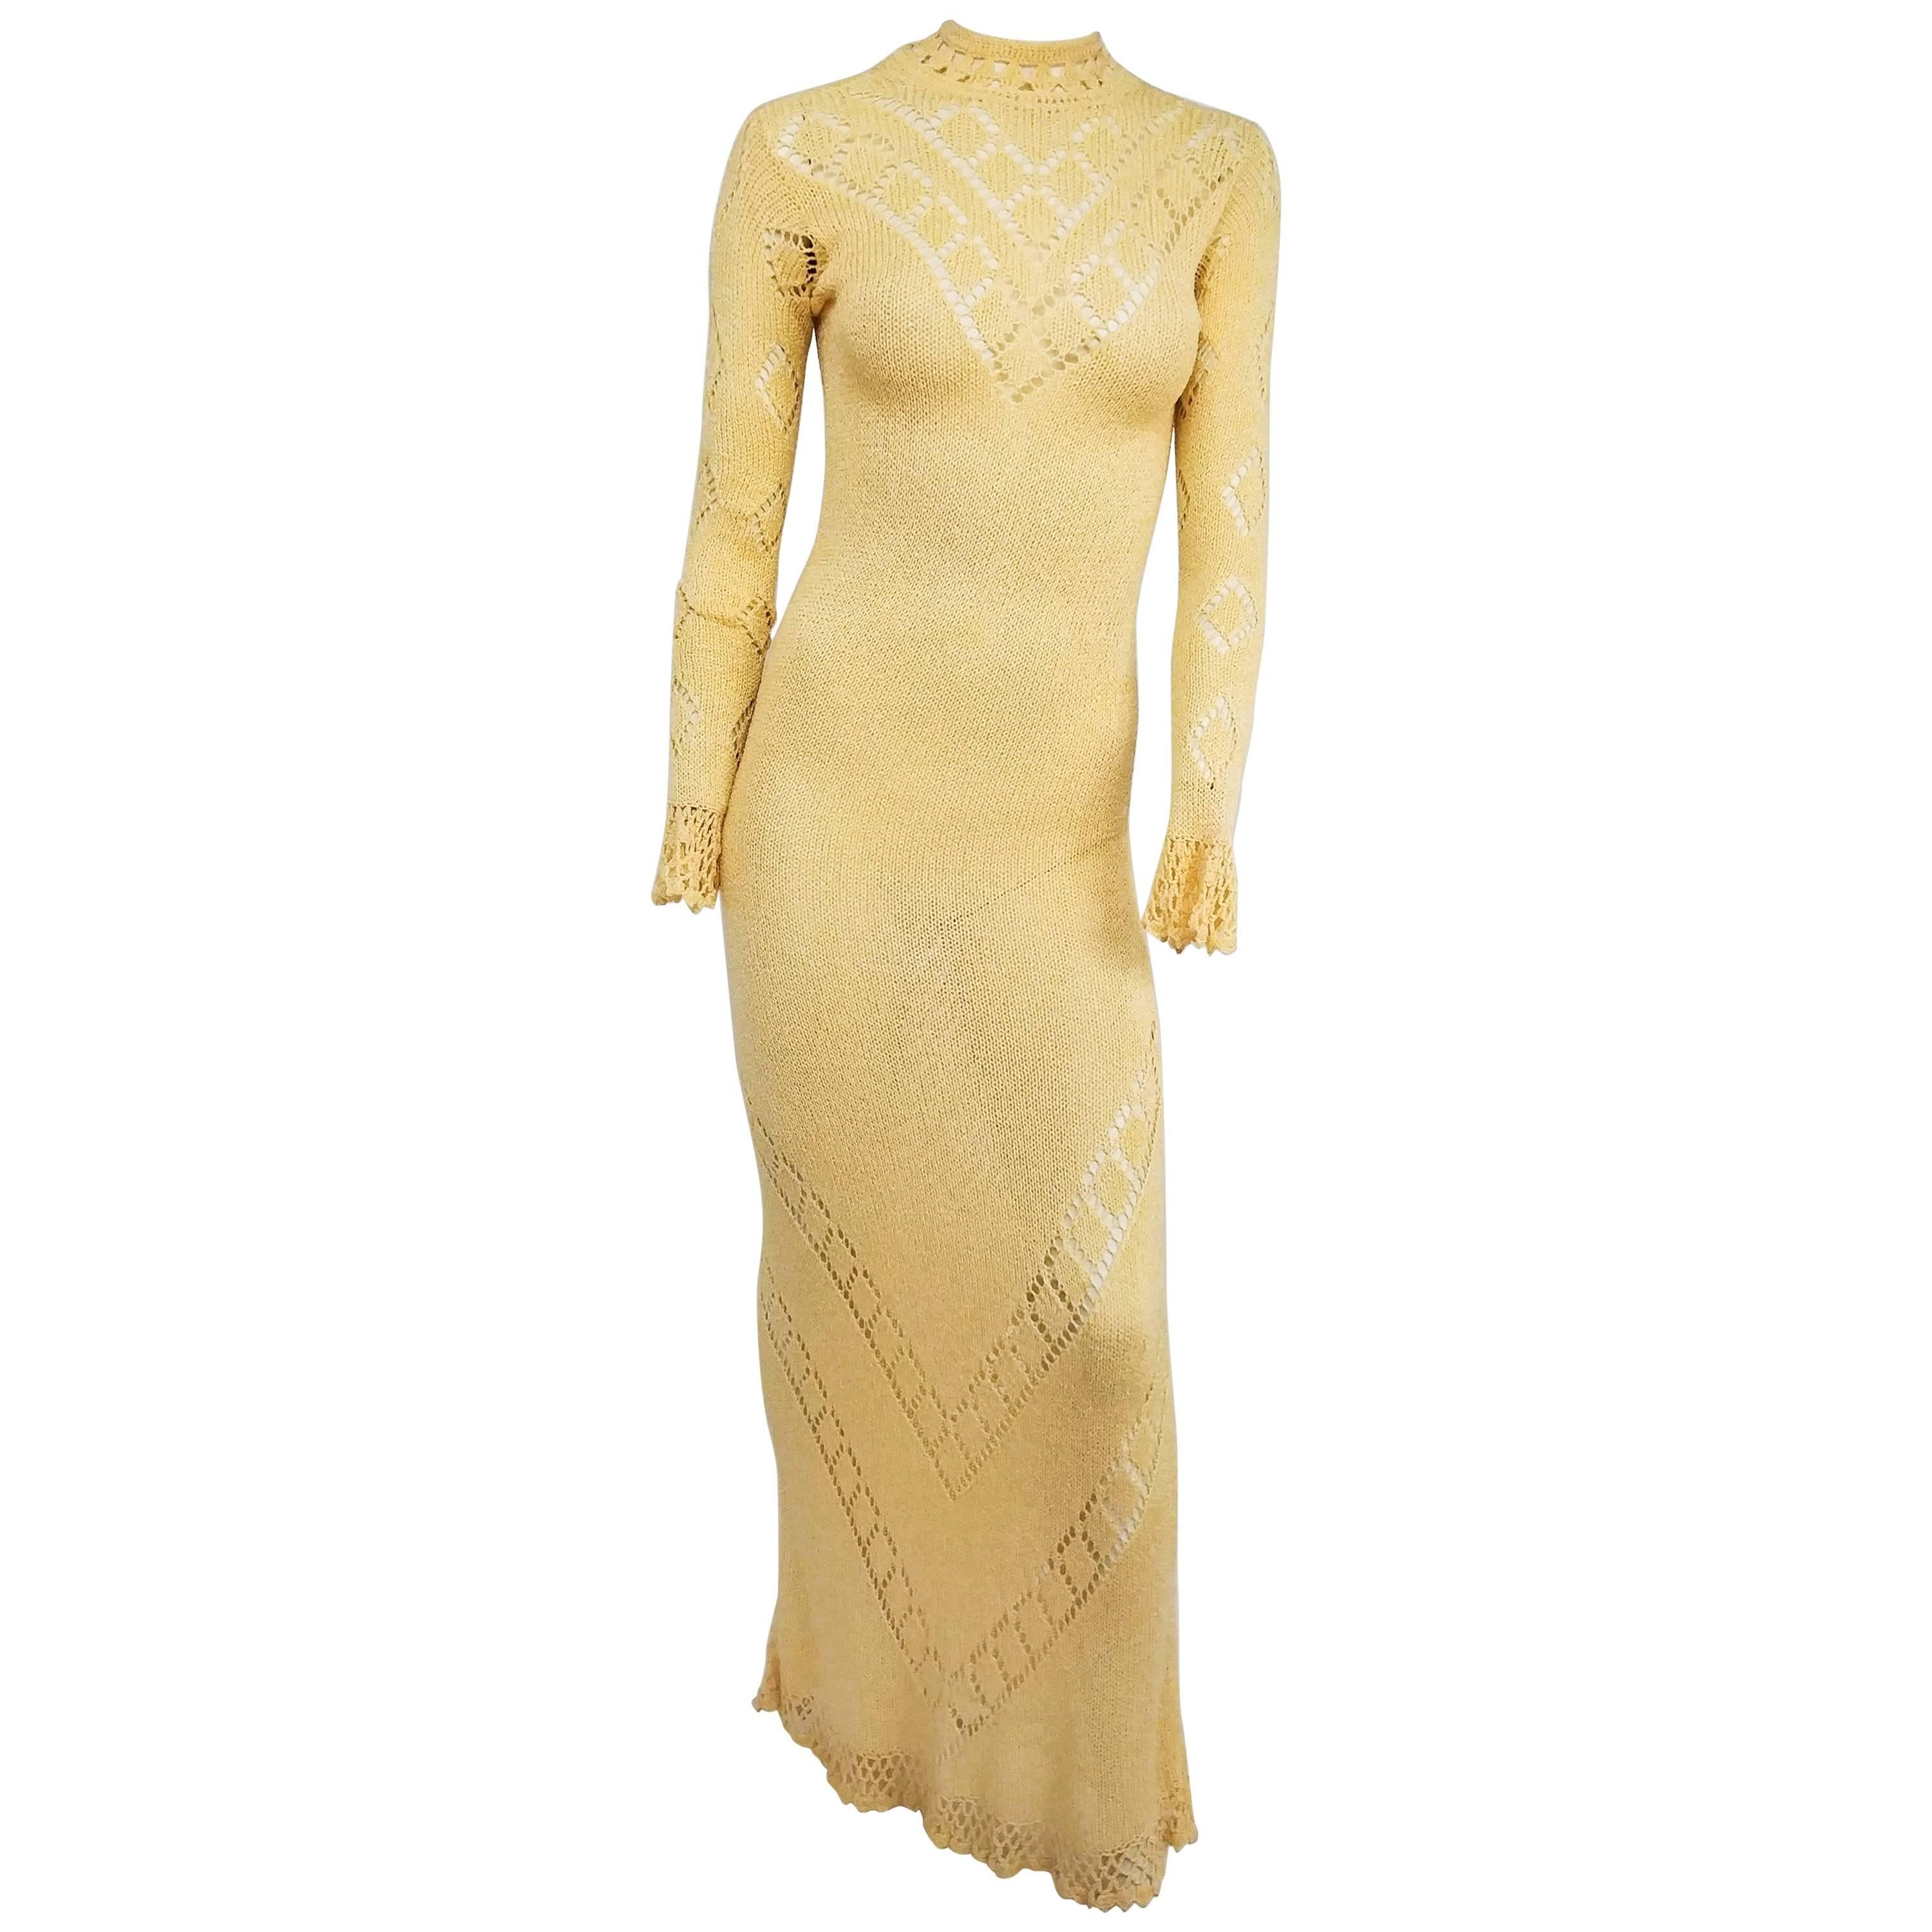 Buttercup Yellow Crochet Maxi Dress with Sexy Back Keyhole, 1970s 